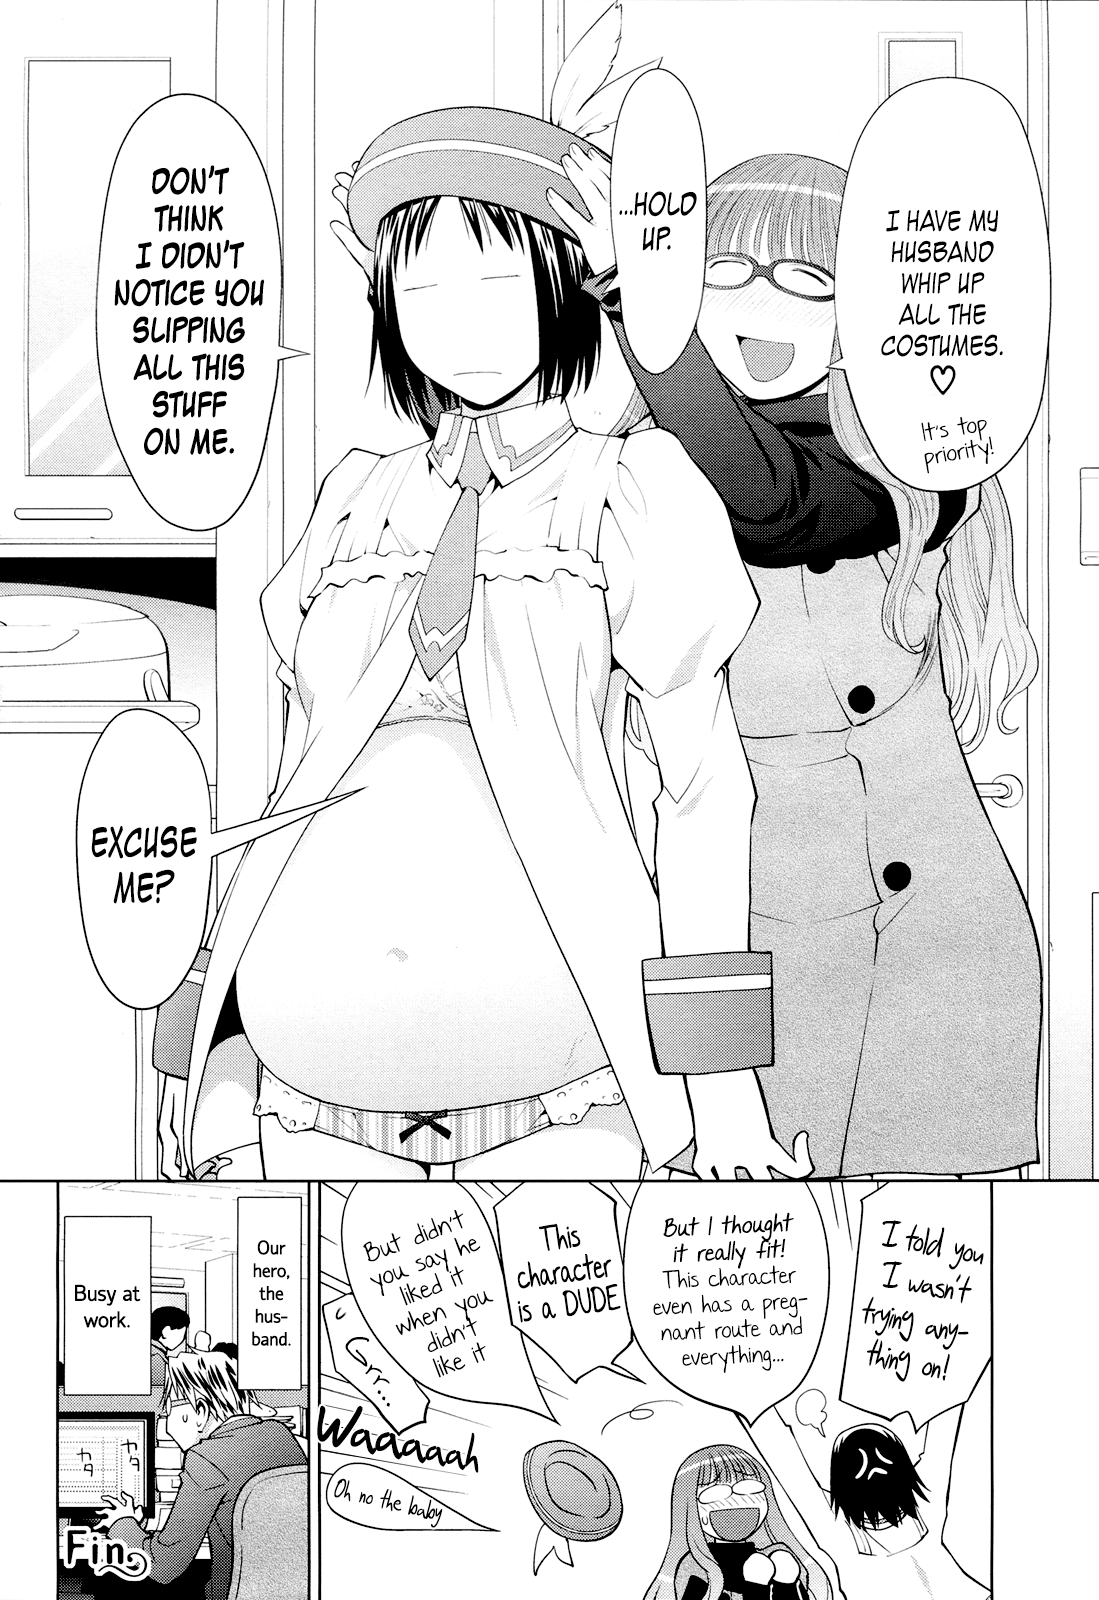 Mangas about pregnancy